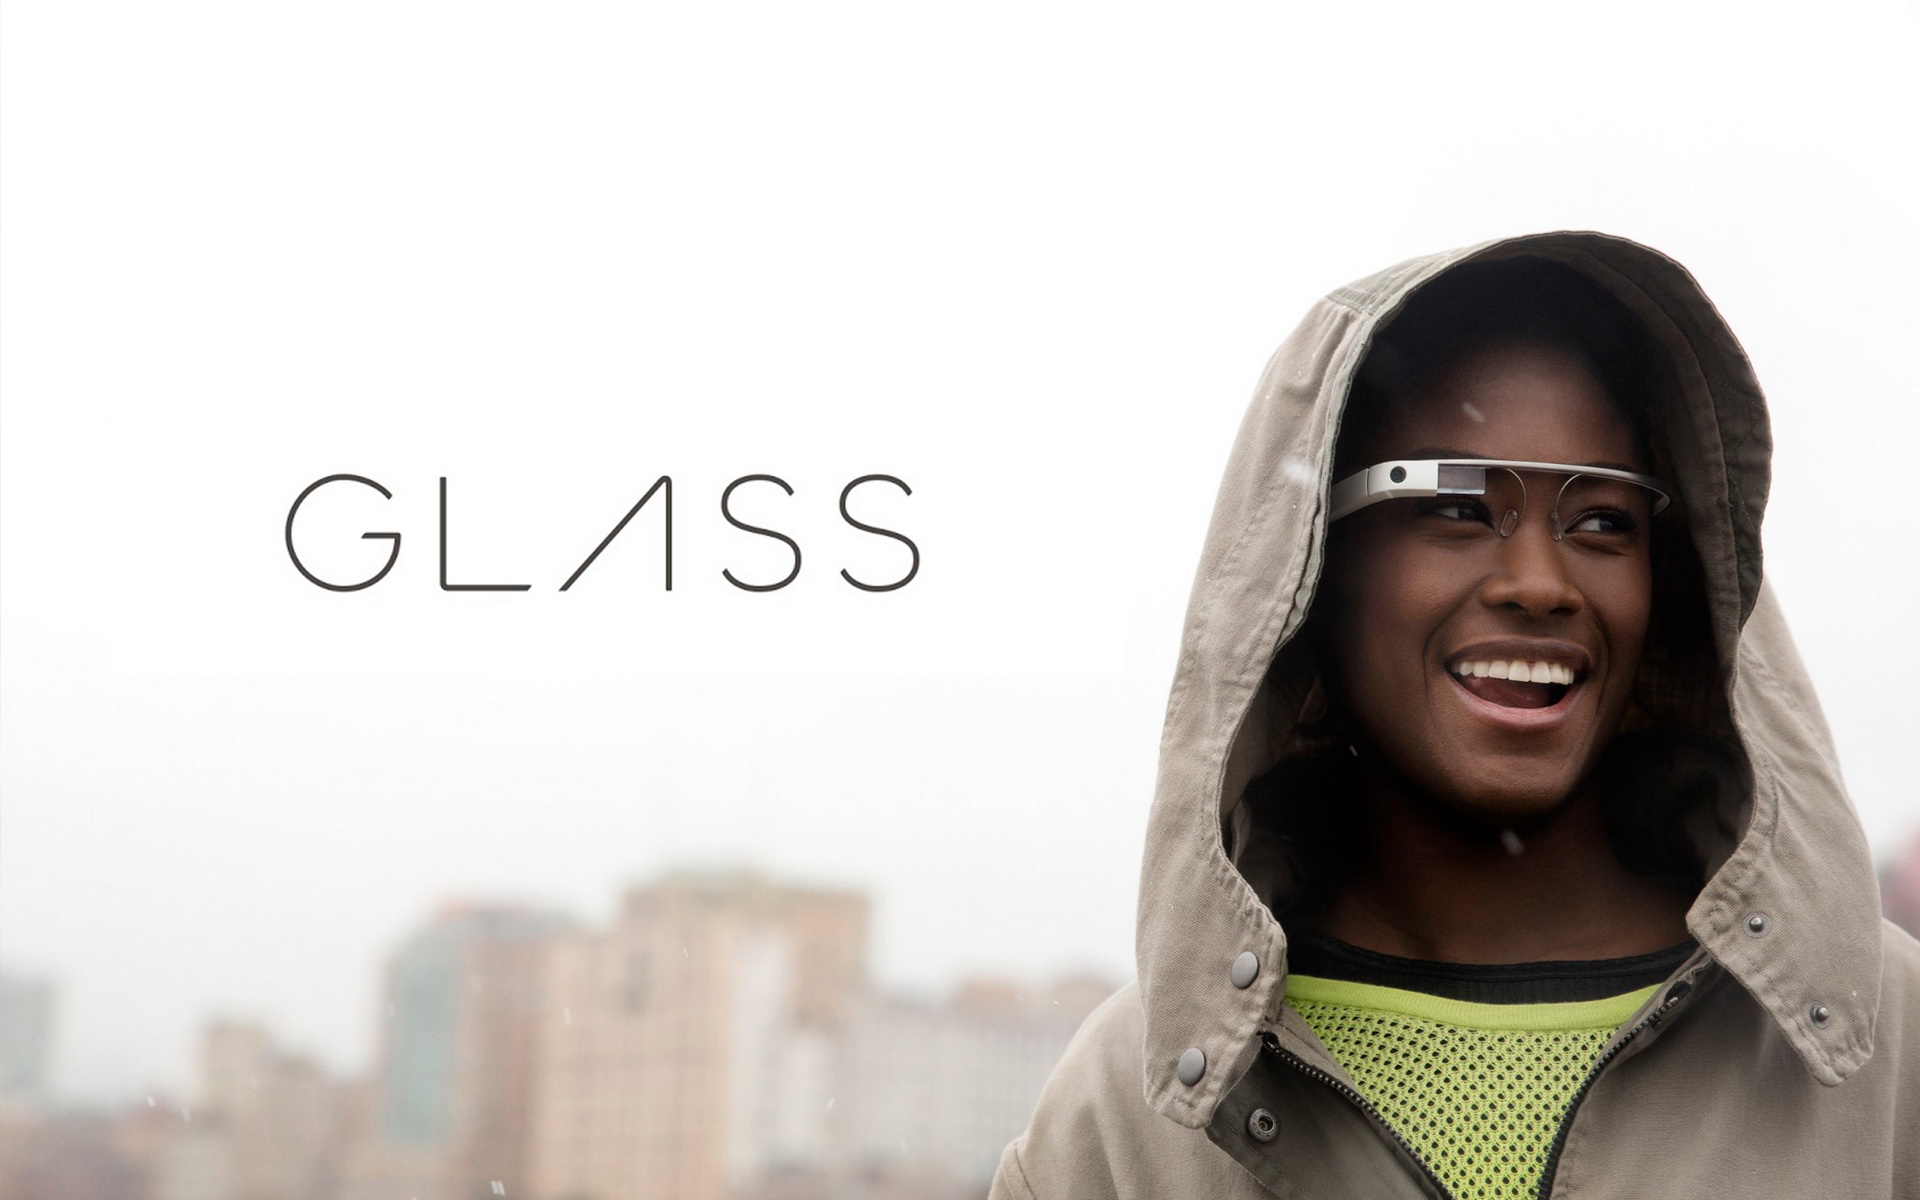 One year later: Is Google Glass a bust?